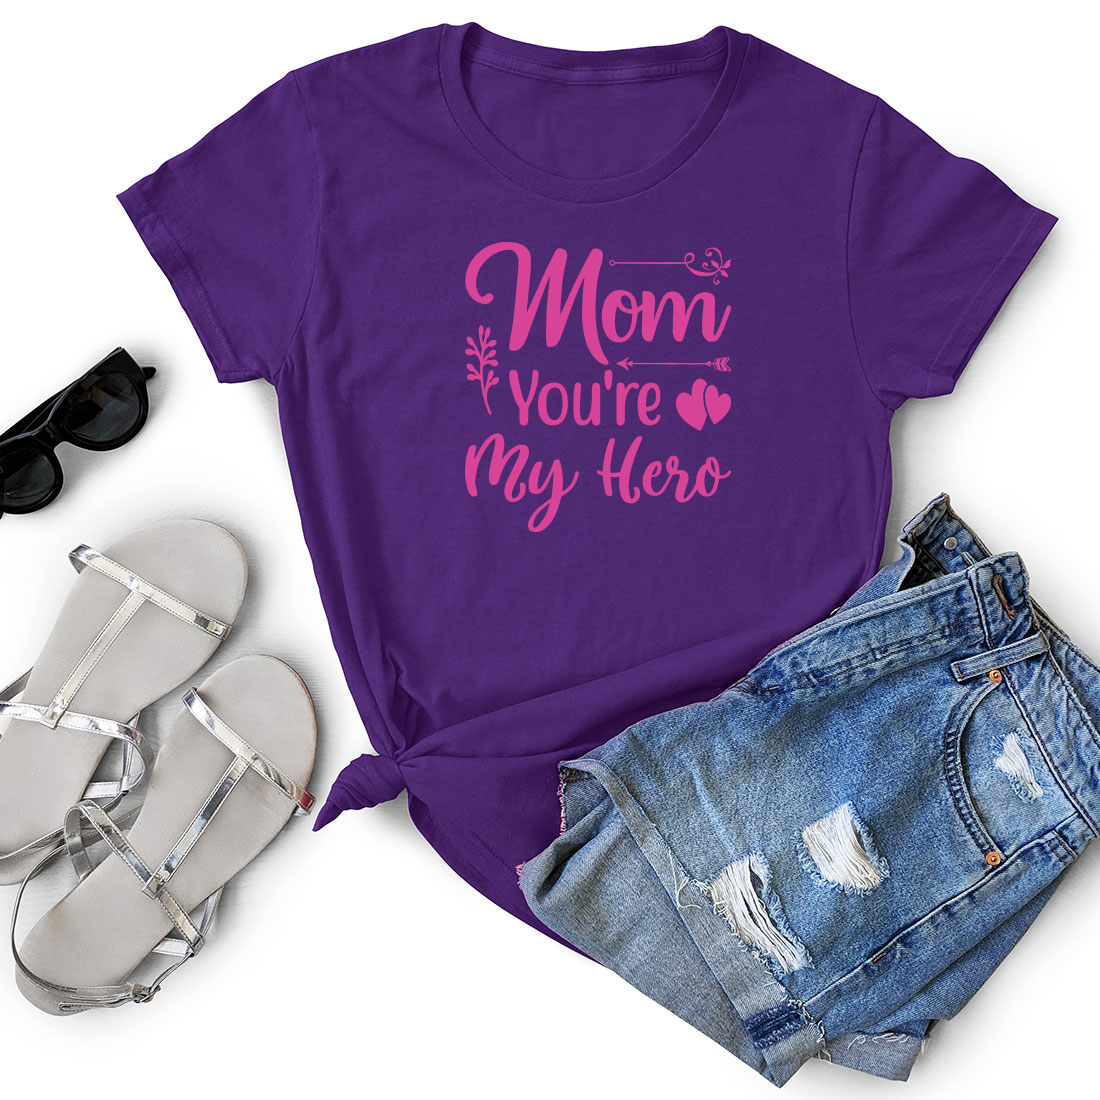 T - shirt that says mom you're my hero next to a pair.